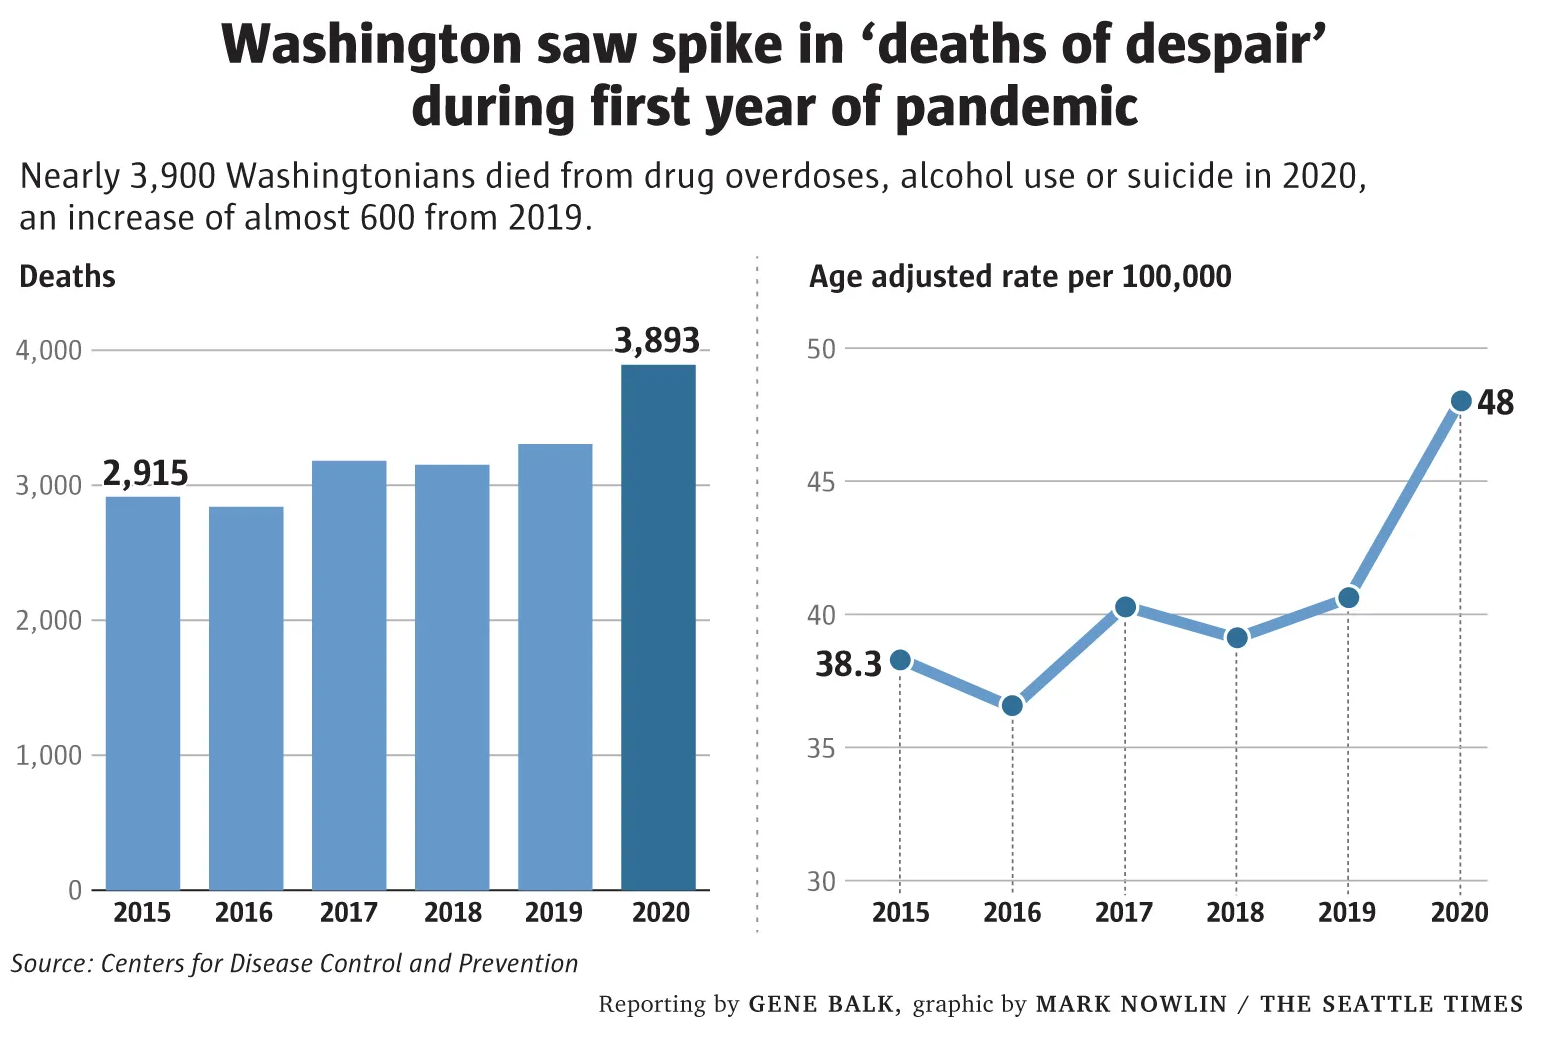 Deaths from overdoses, alcohol use, or suicide in Washington state, 2015-2020. Nearly 3,900 Washingtonians died from “deaths of despair” in 2020, an increase of almost 600 since 2019. Graphic: Mark Nowlin / The Seattle Times